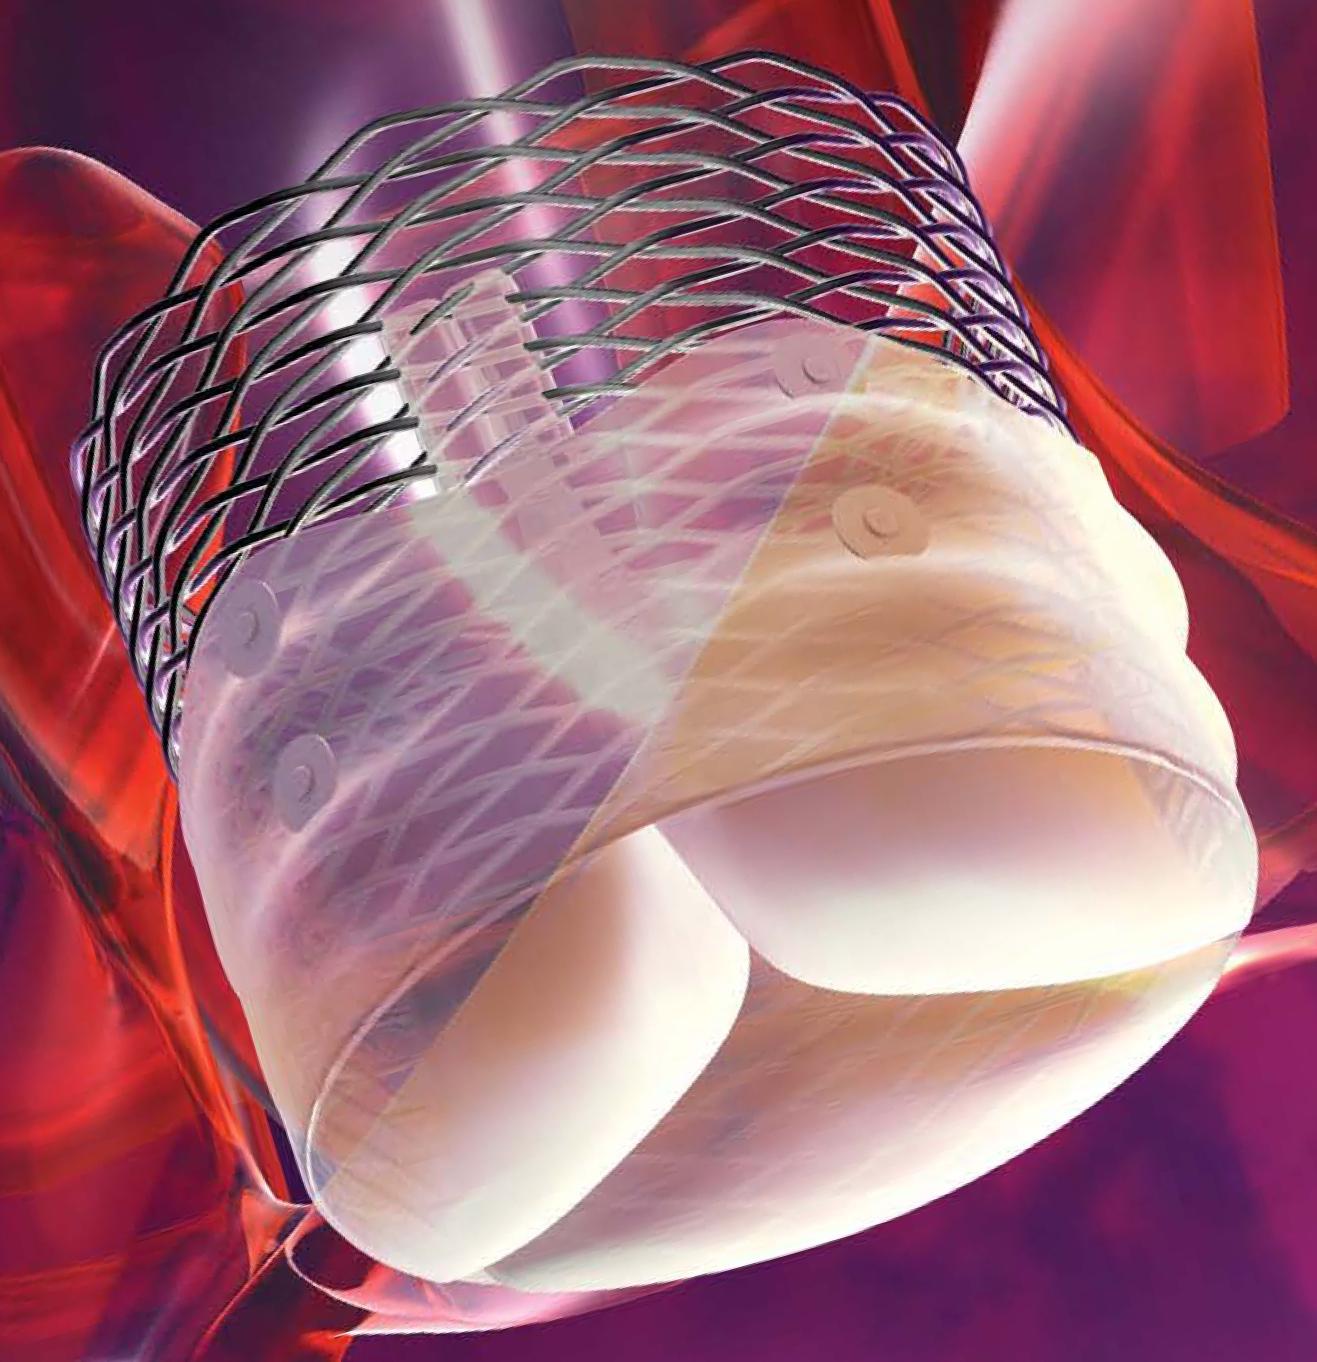 Boston Scientific Reports First Commercial Implants of Lotus Valve System in Europe